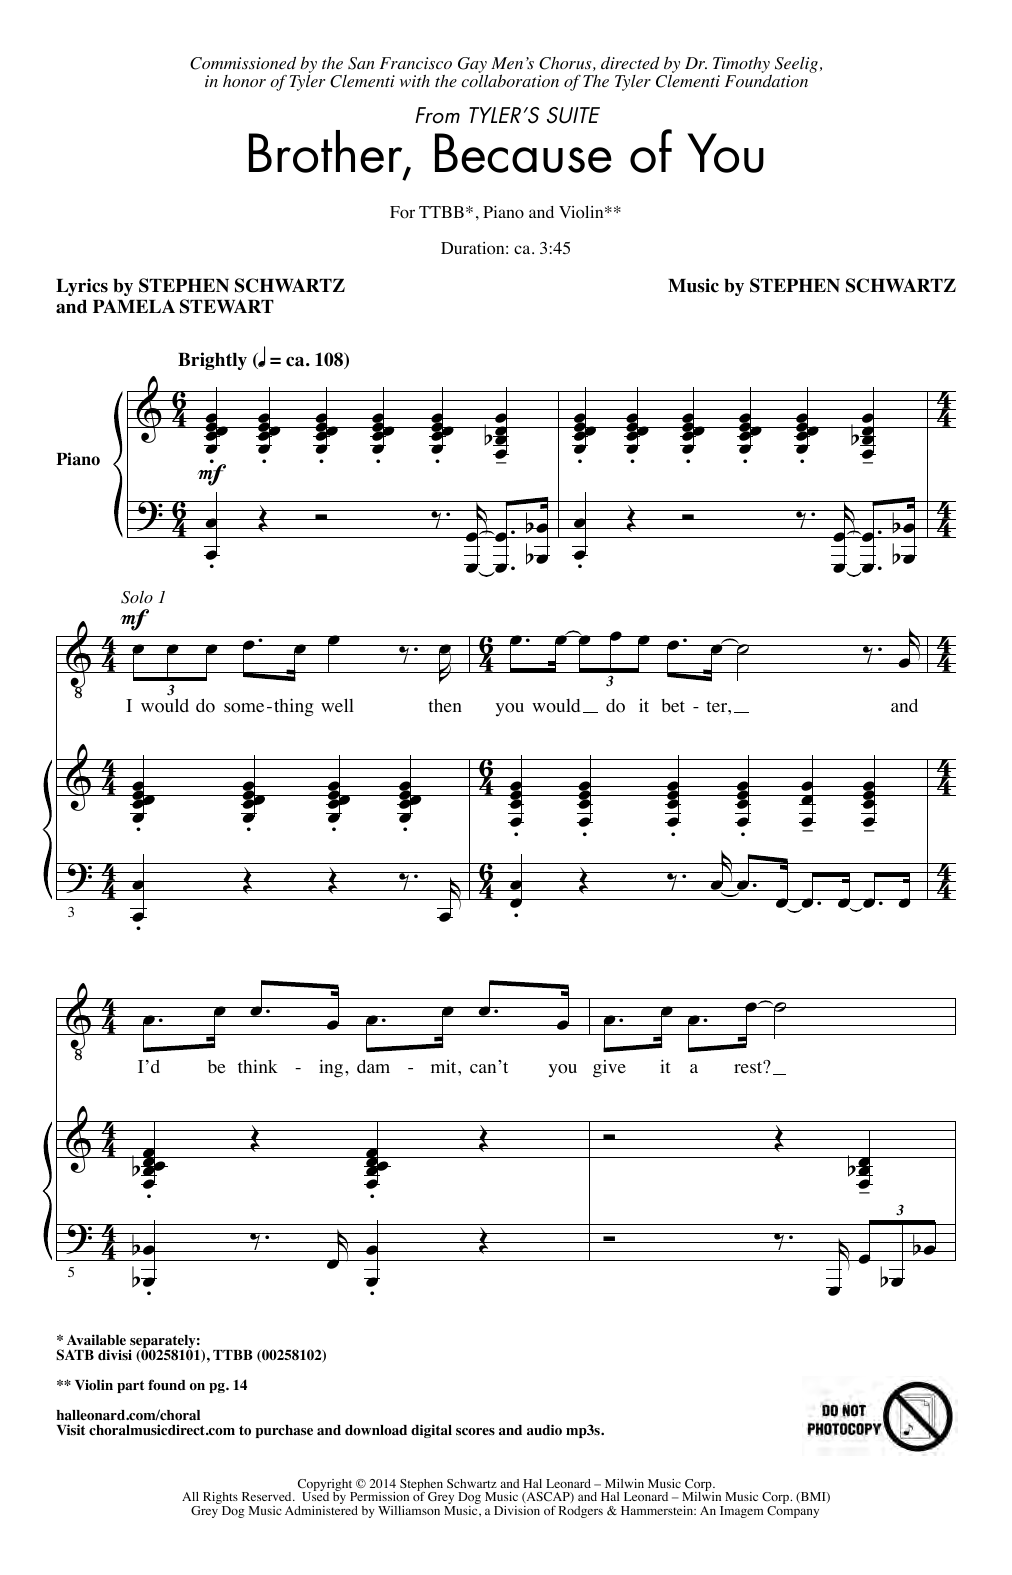 Download Stephen Schwartz Brother, Because Of You (from Tyler's S Sheet Music